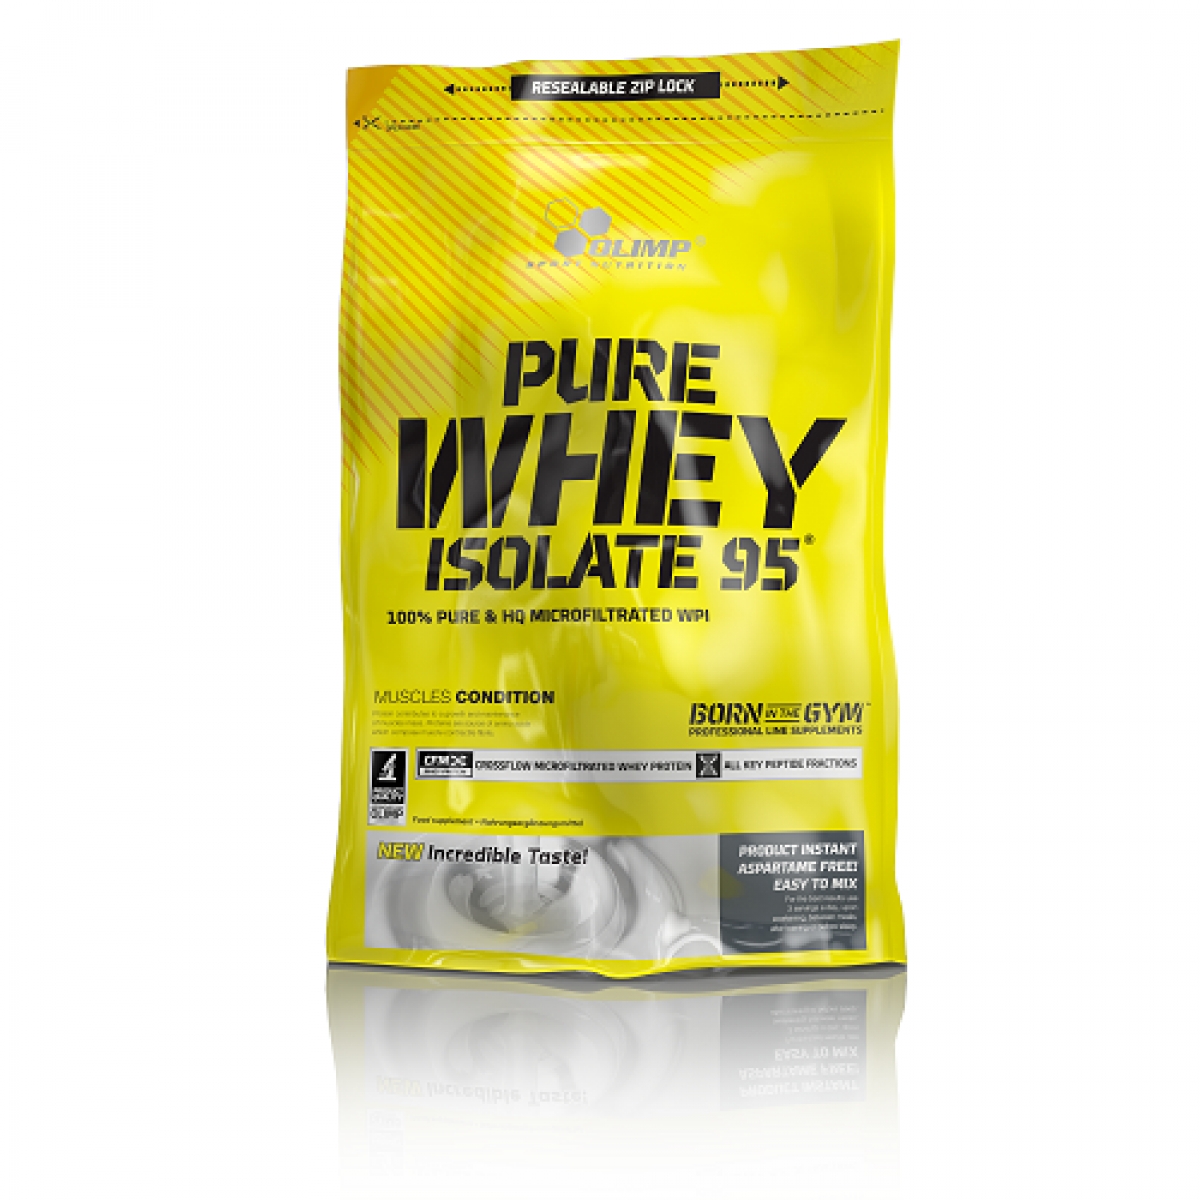 PURE WHEY ISOLATE 95, 600 G